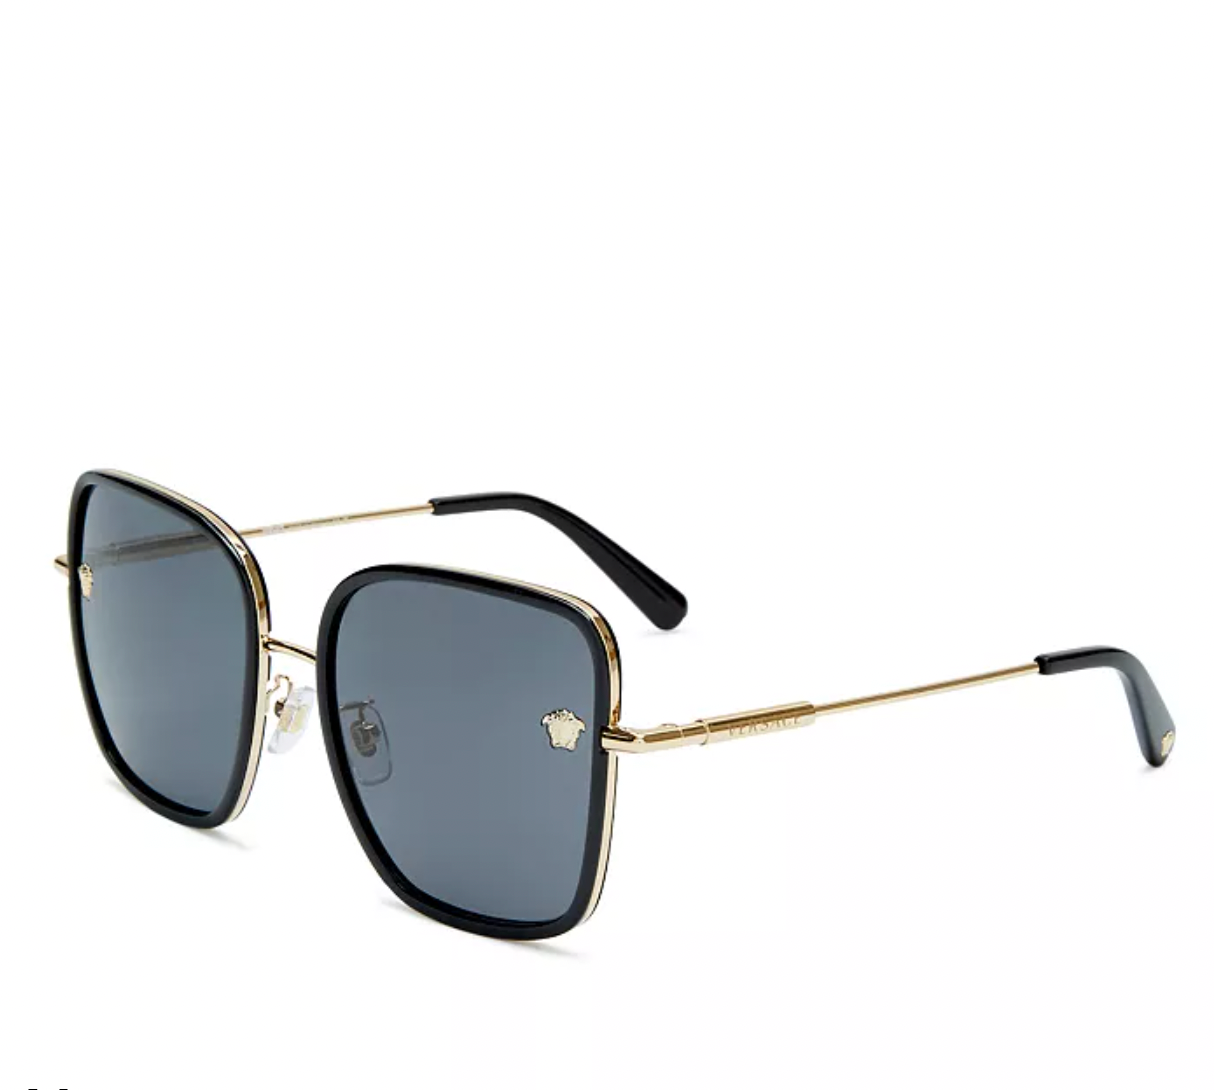 Versace Black and Gold Square Sunglasses